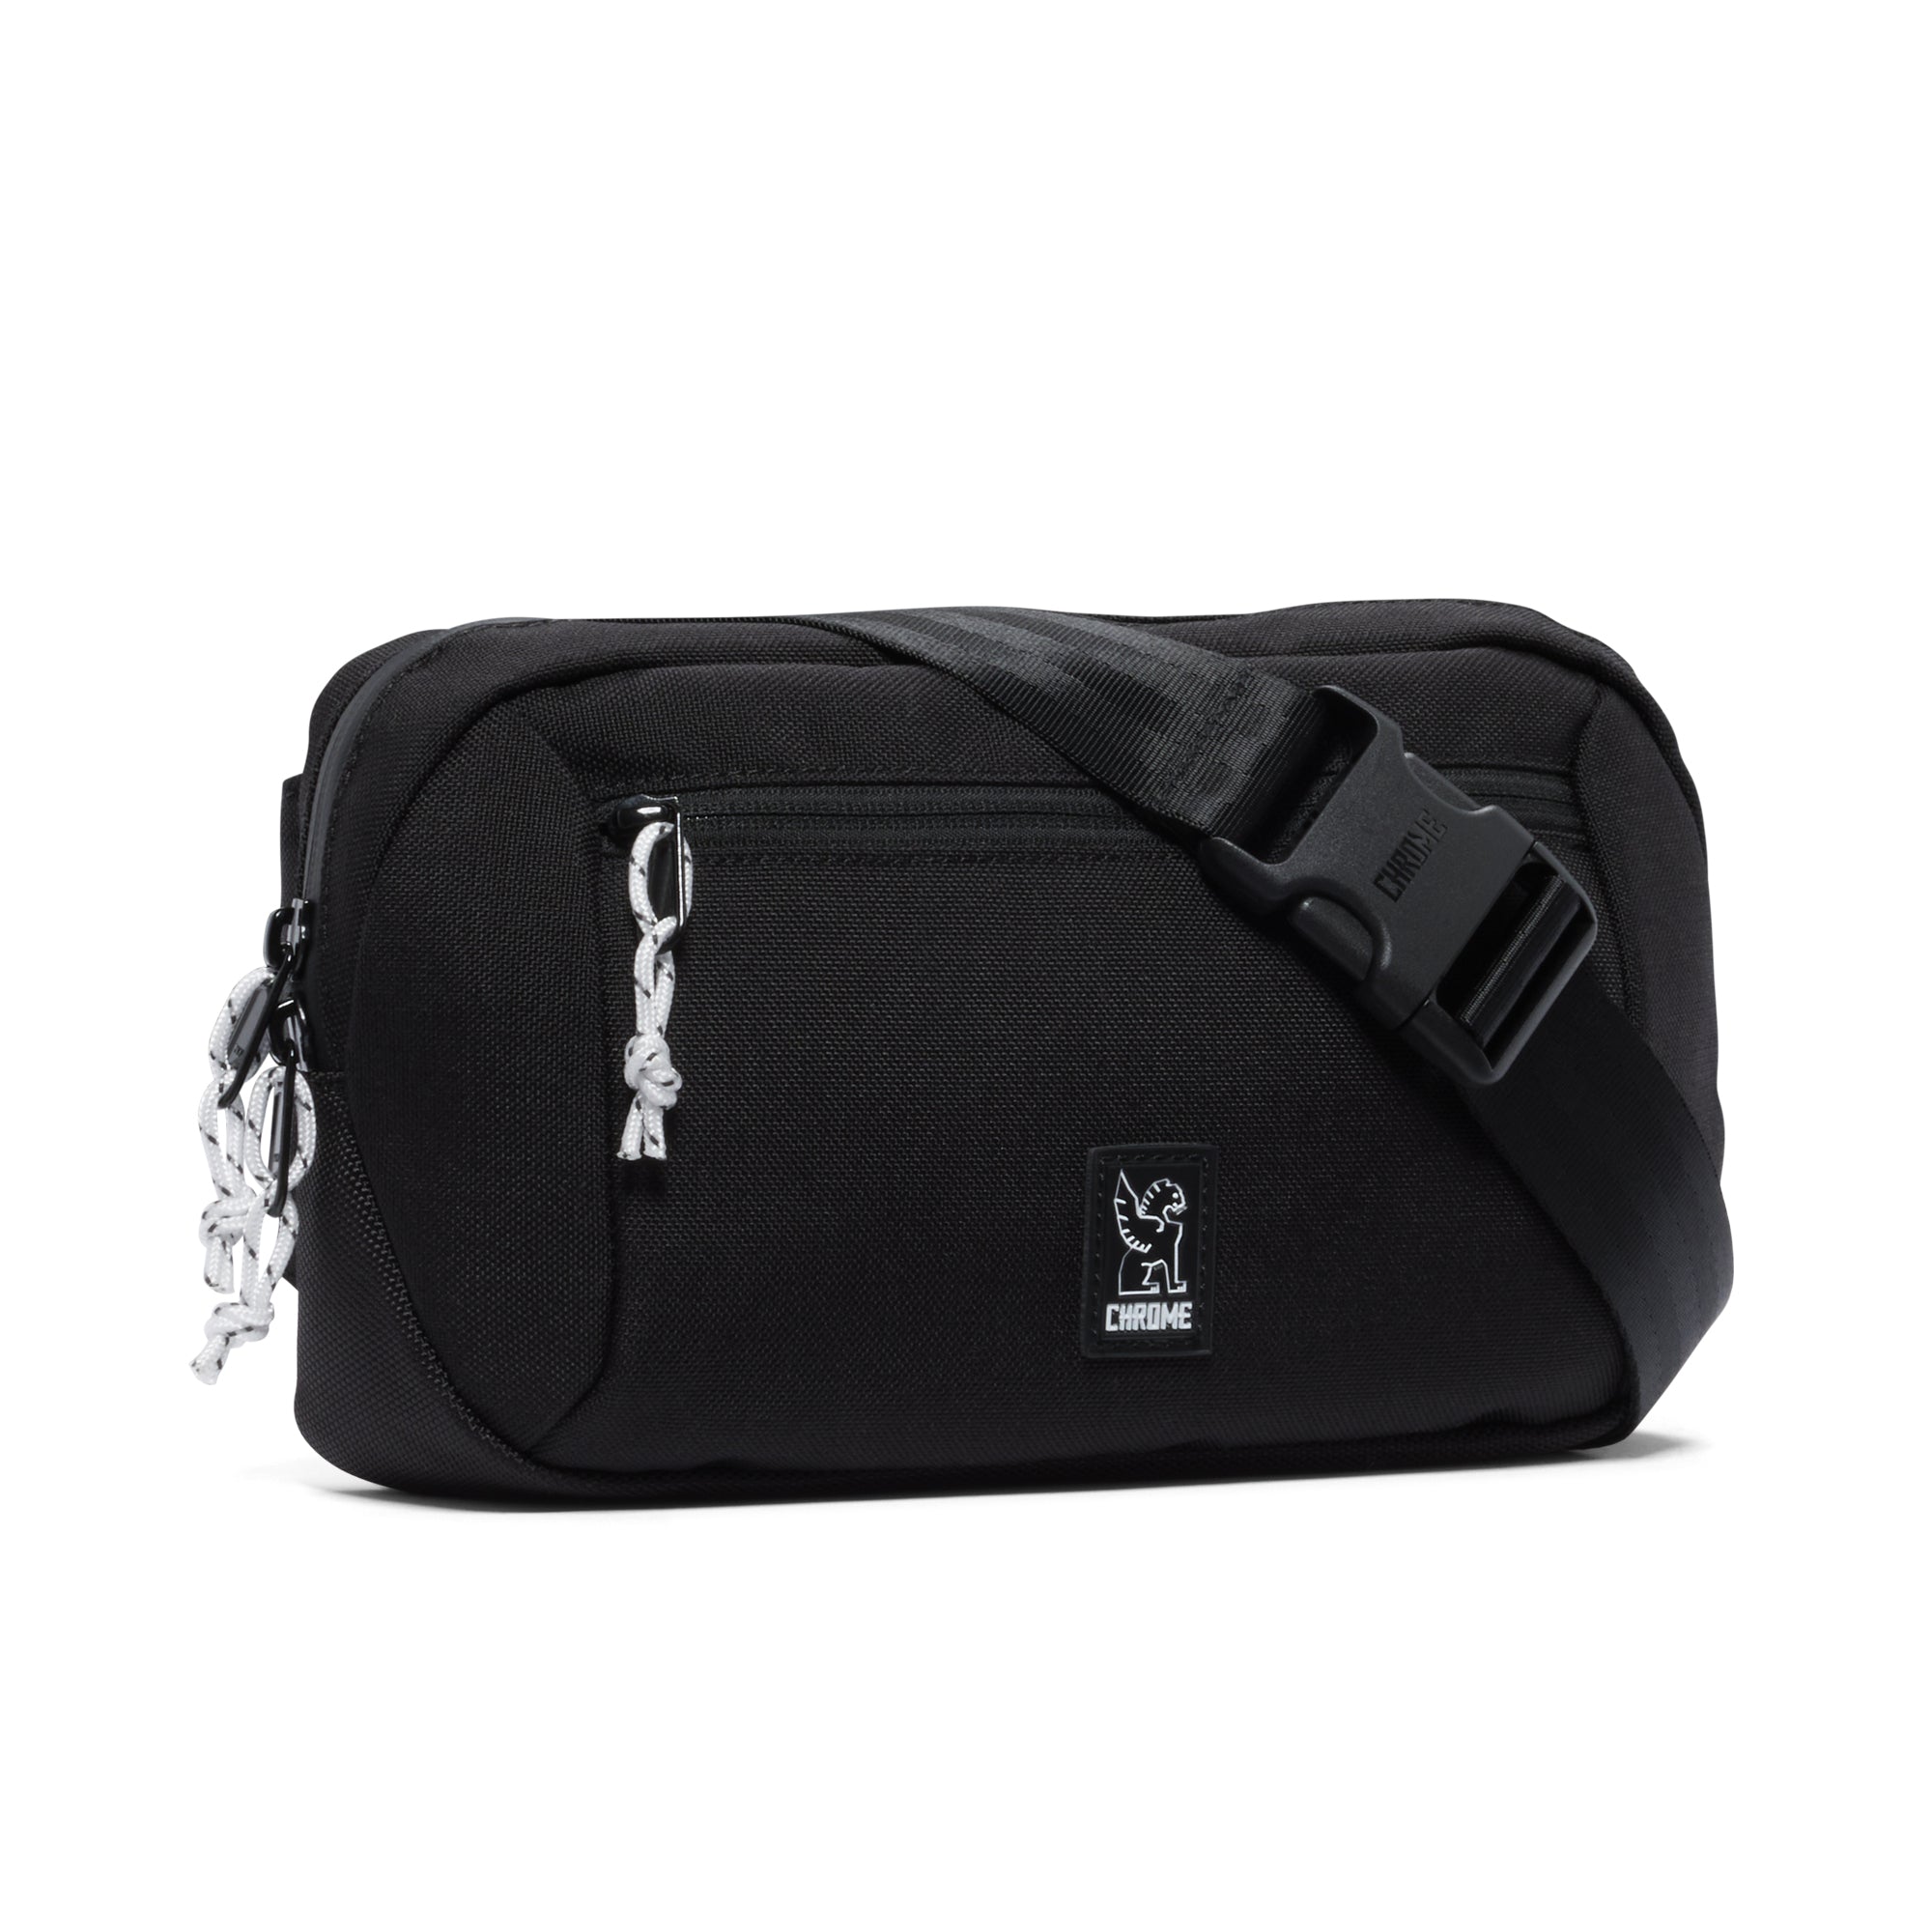 Ziptop waistpack collab with ALC with white liner #color_black / alc black